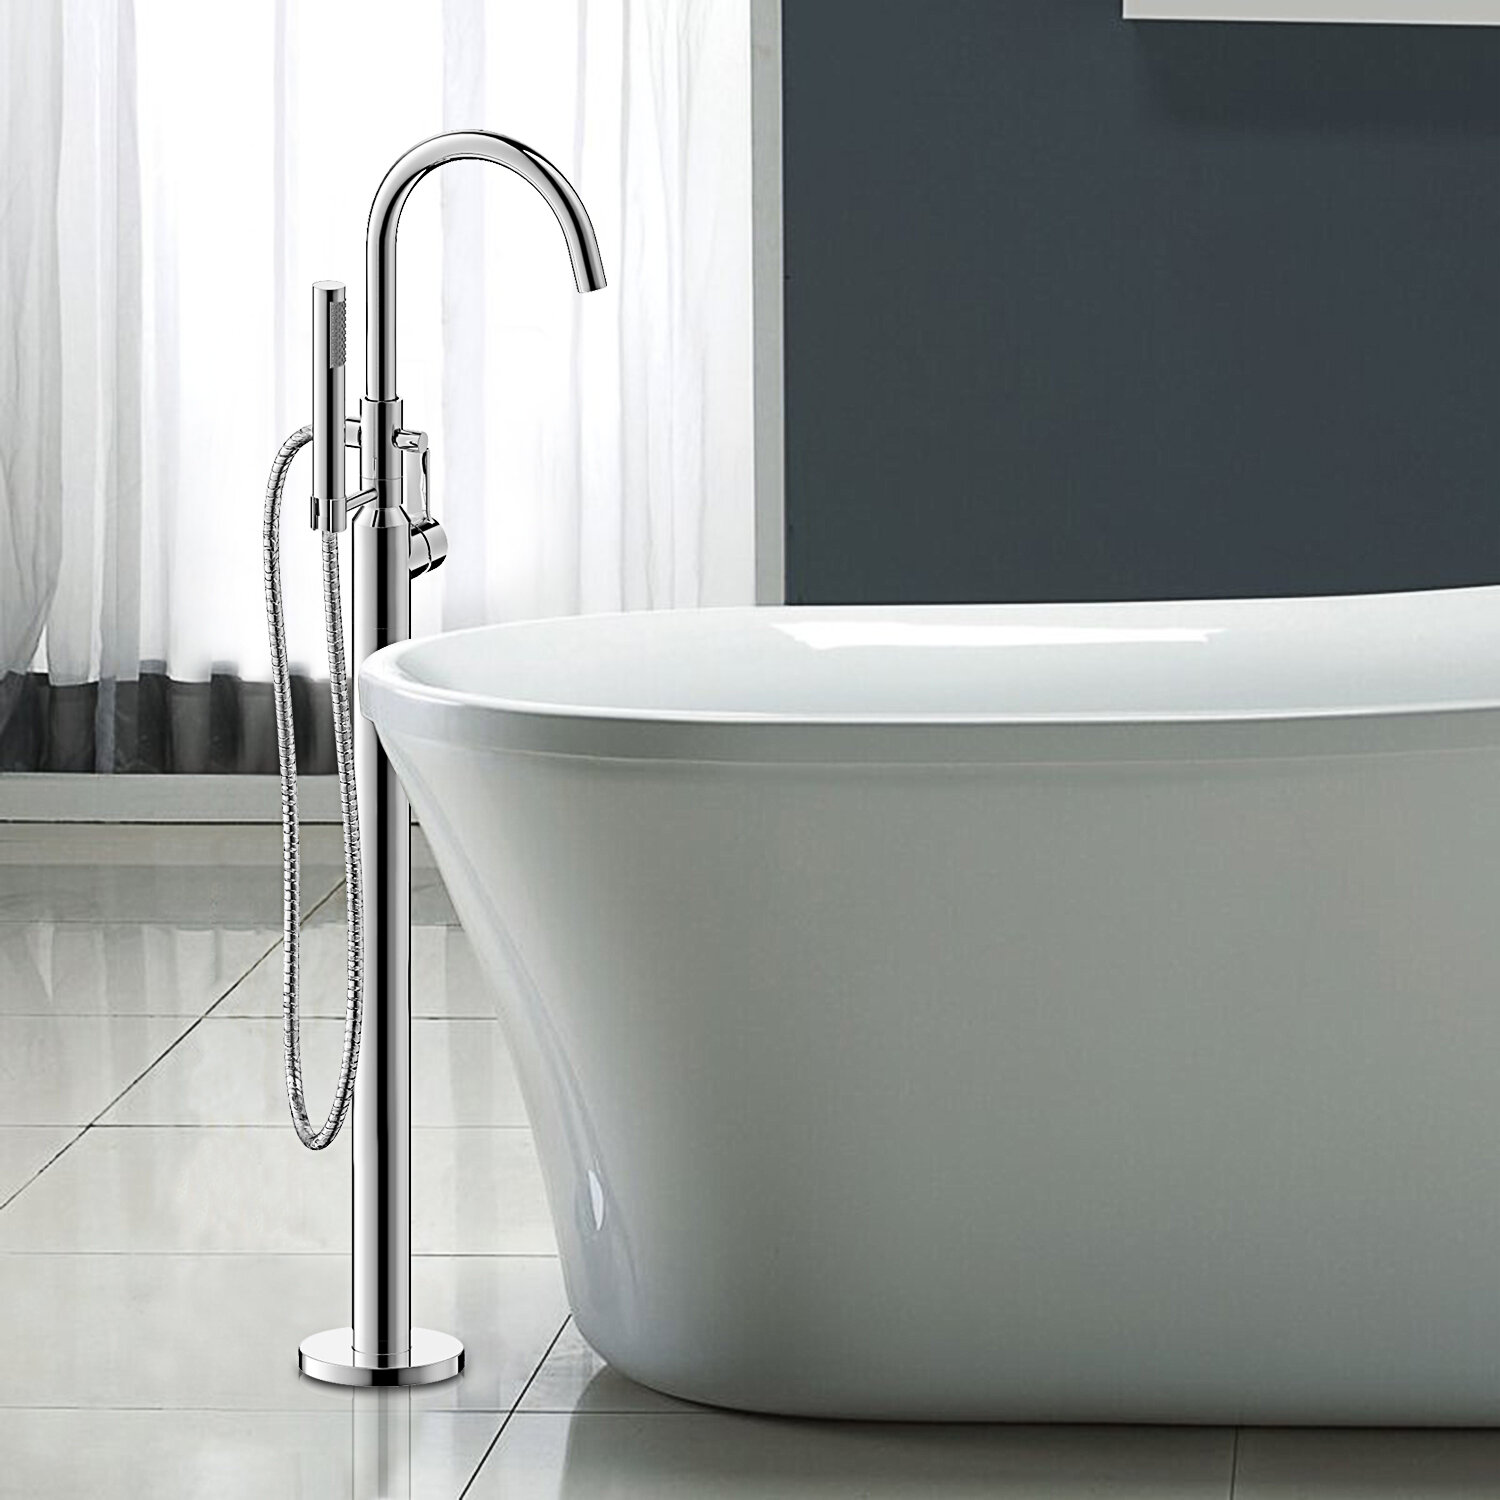 Details about   Brushed Nickel LED Floor Mounted Tub Filler Free Standing Mixer Tap W/Hand Spray 